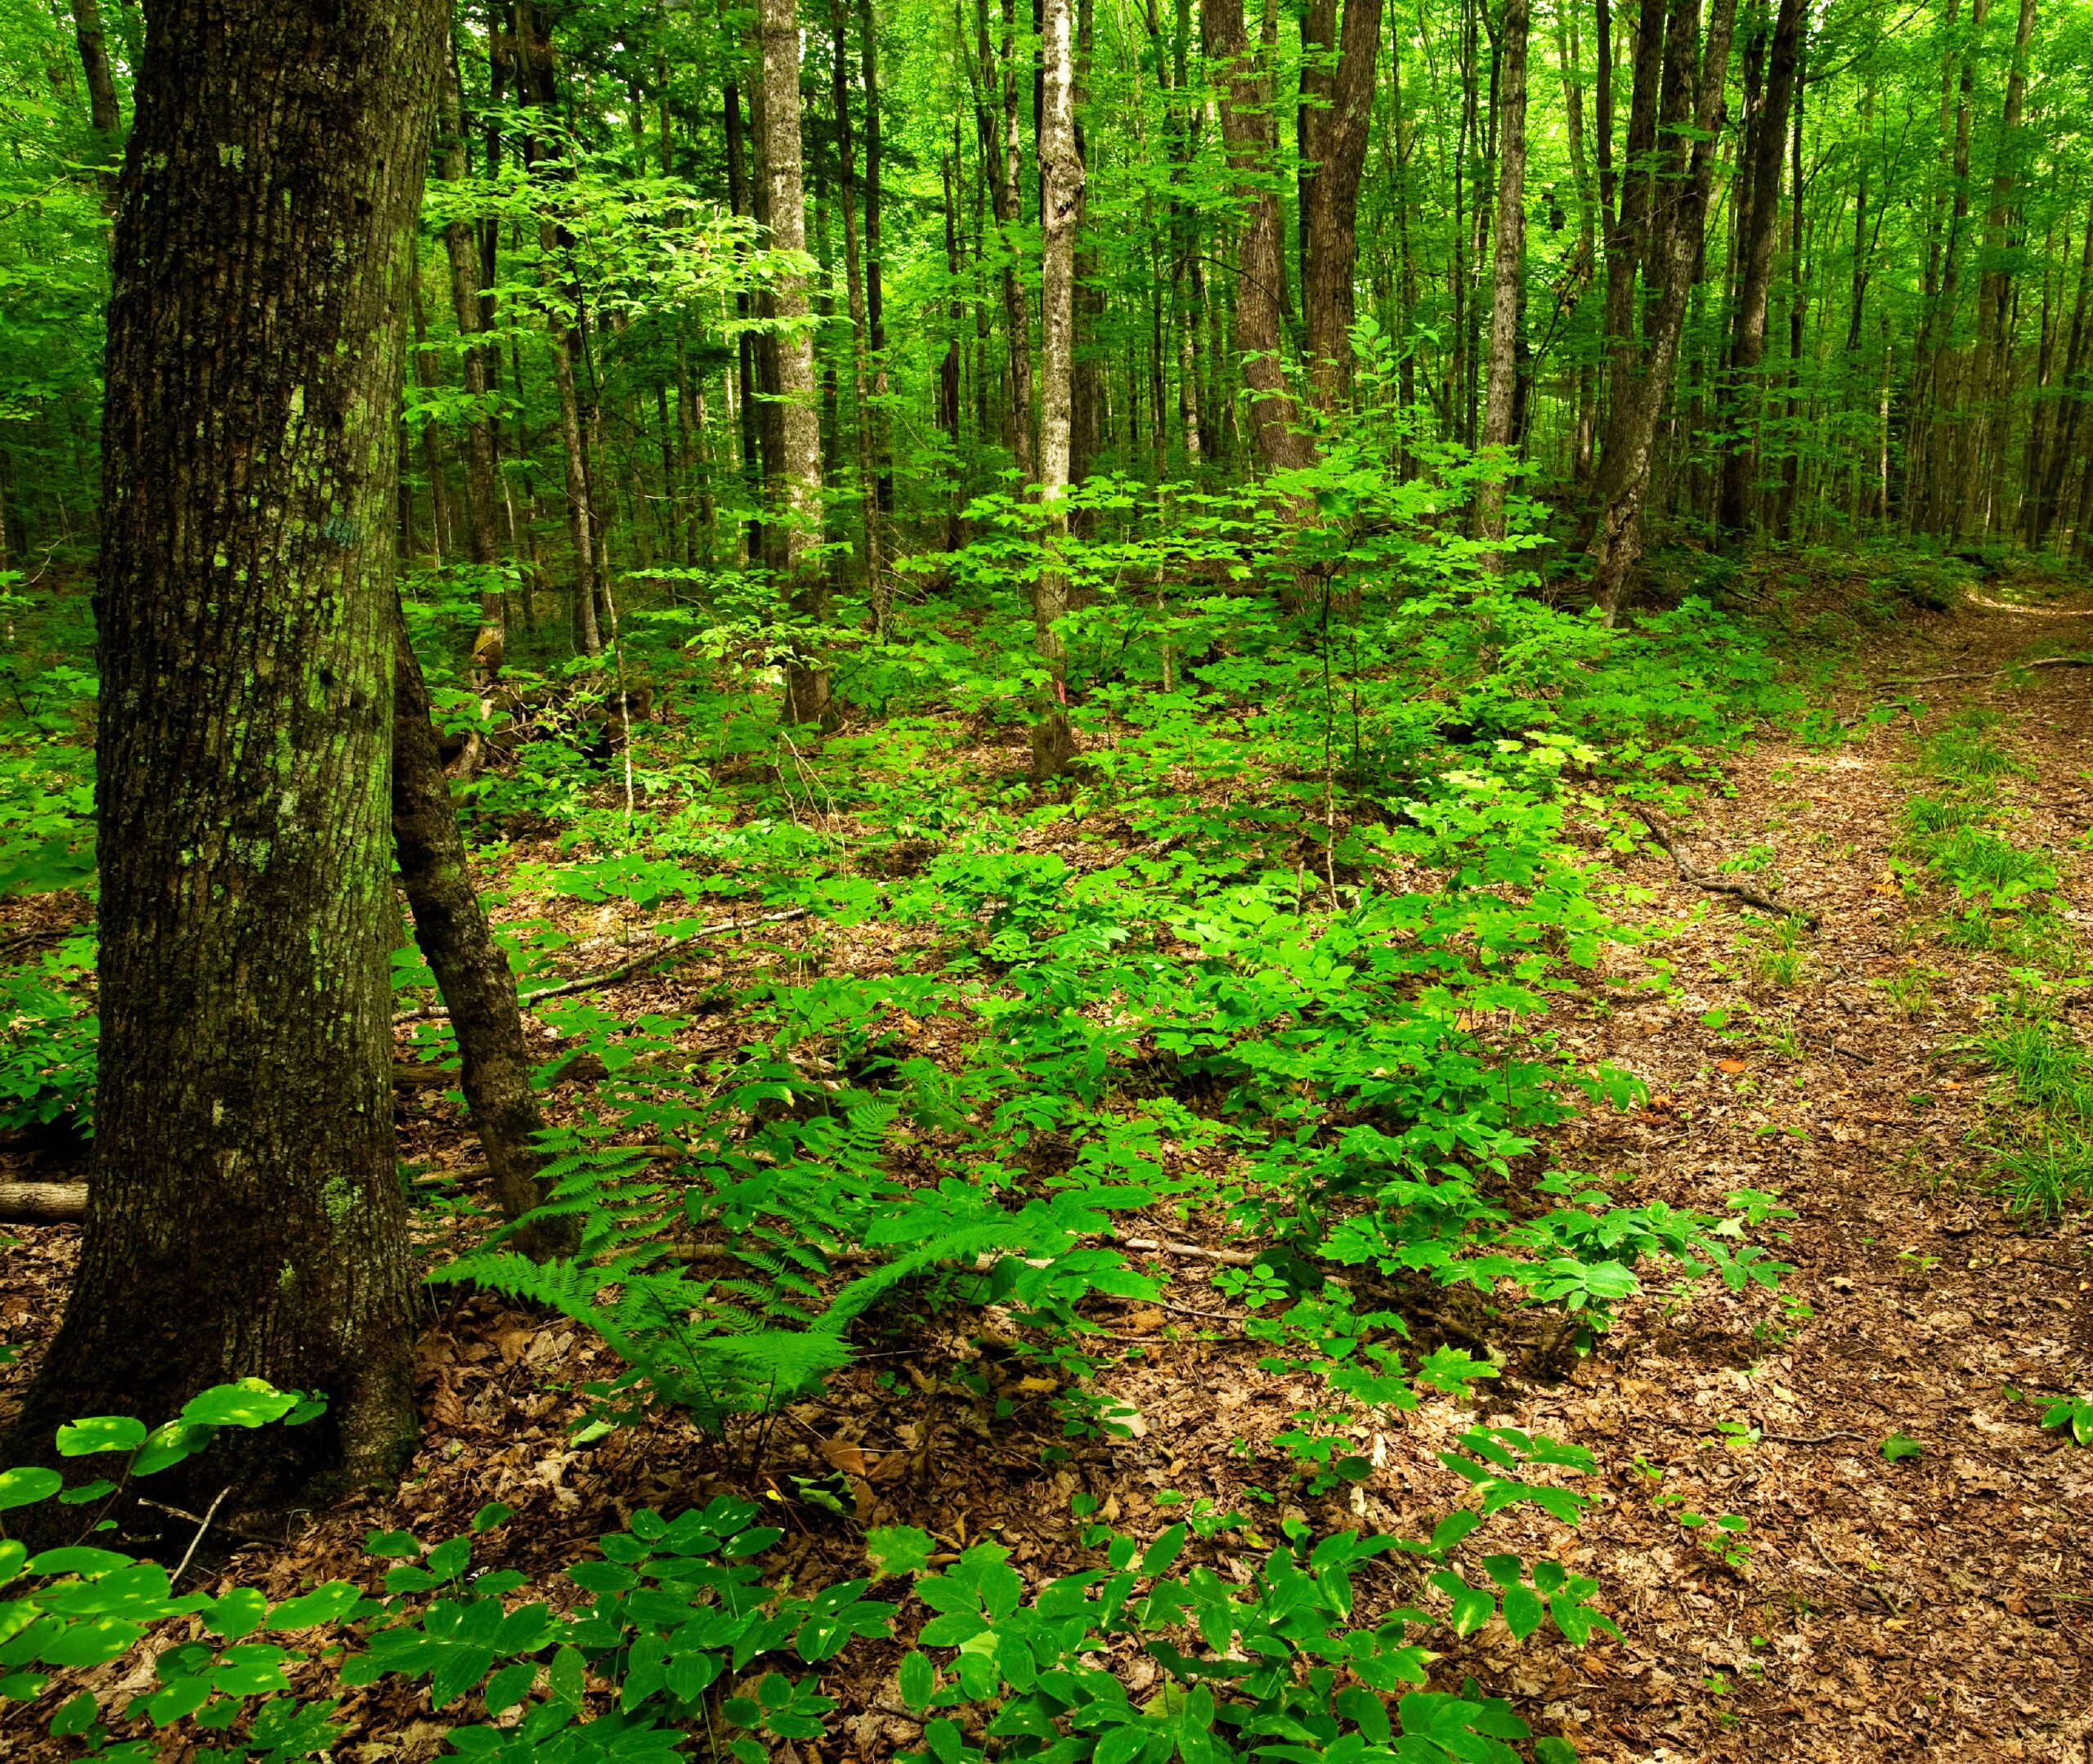 The forest at Kawartha Land Trust's Vincent Woods in Summer